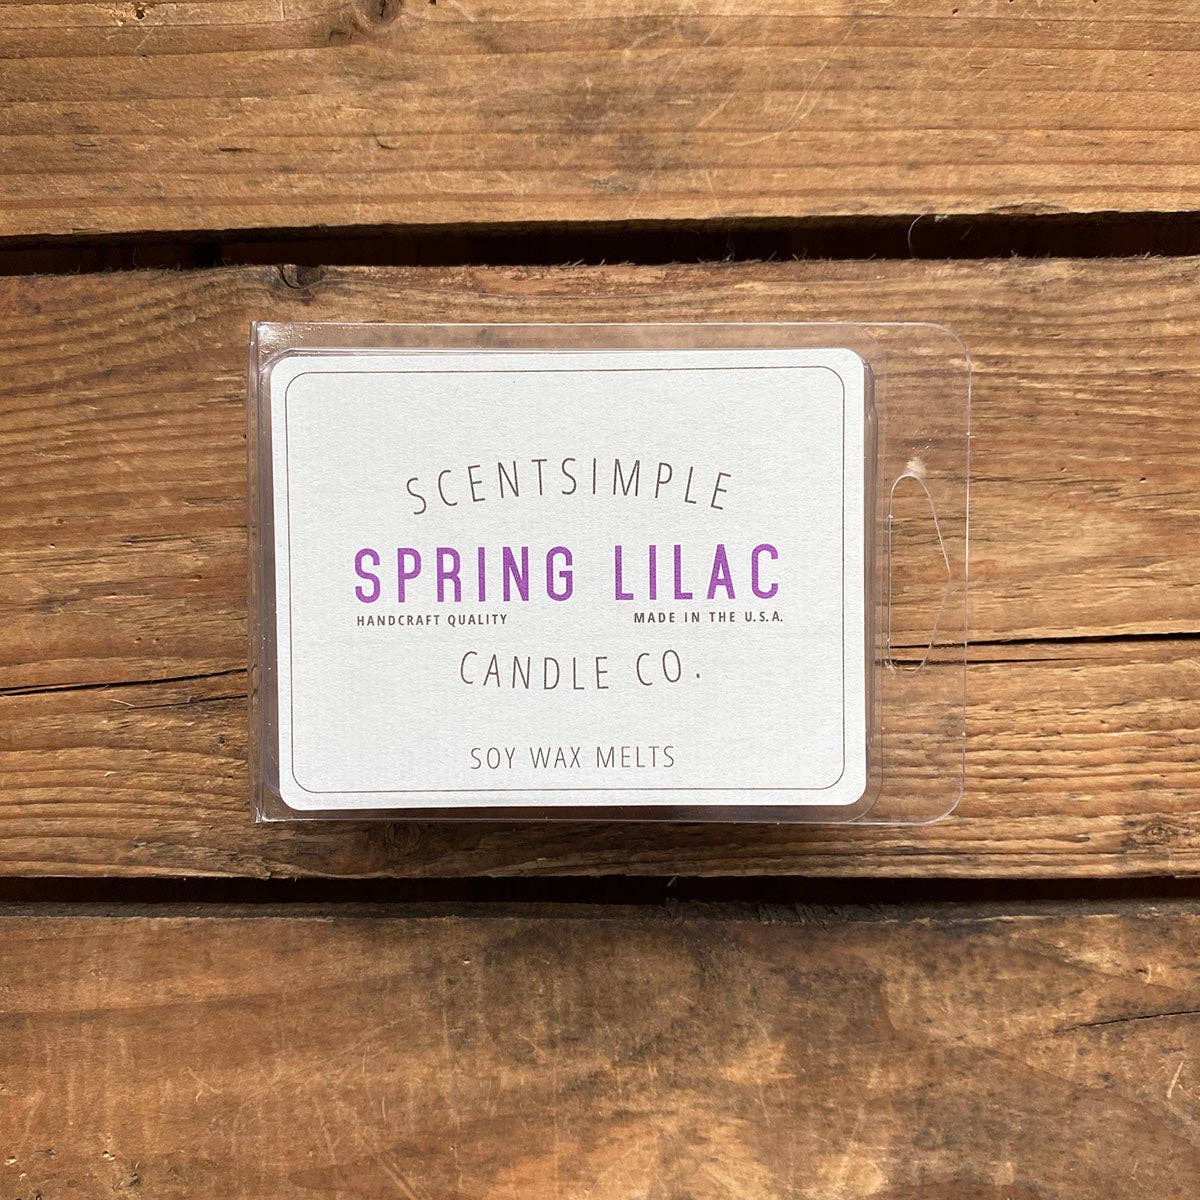 ScentSimple Candle Co. Spring Lilac Scented Soy Wax Melts